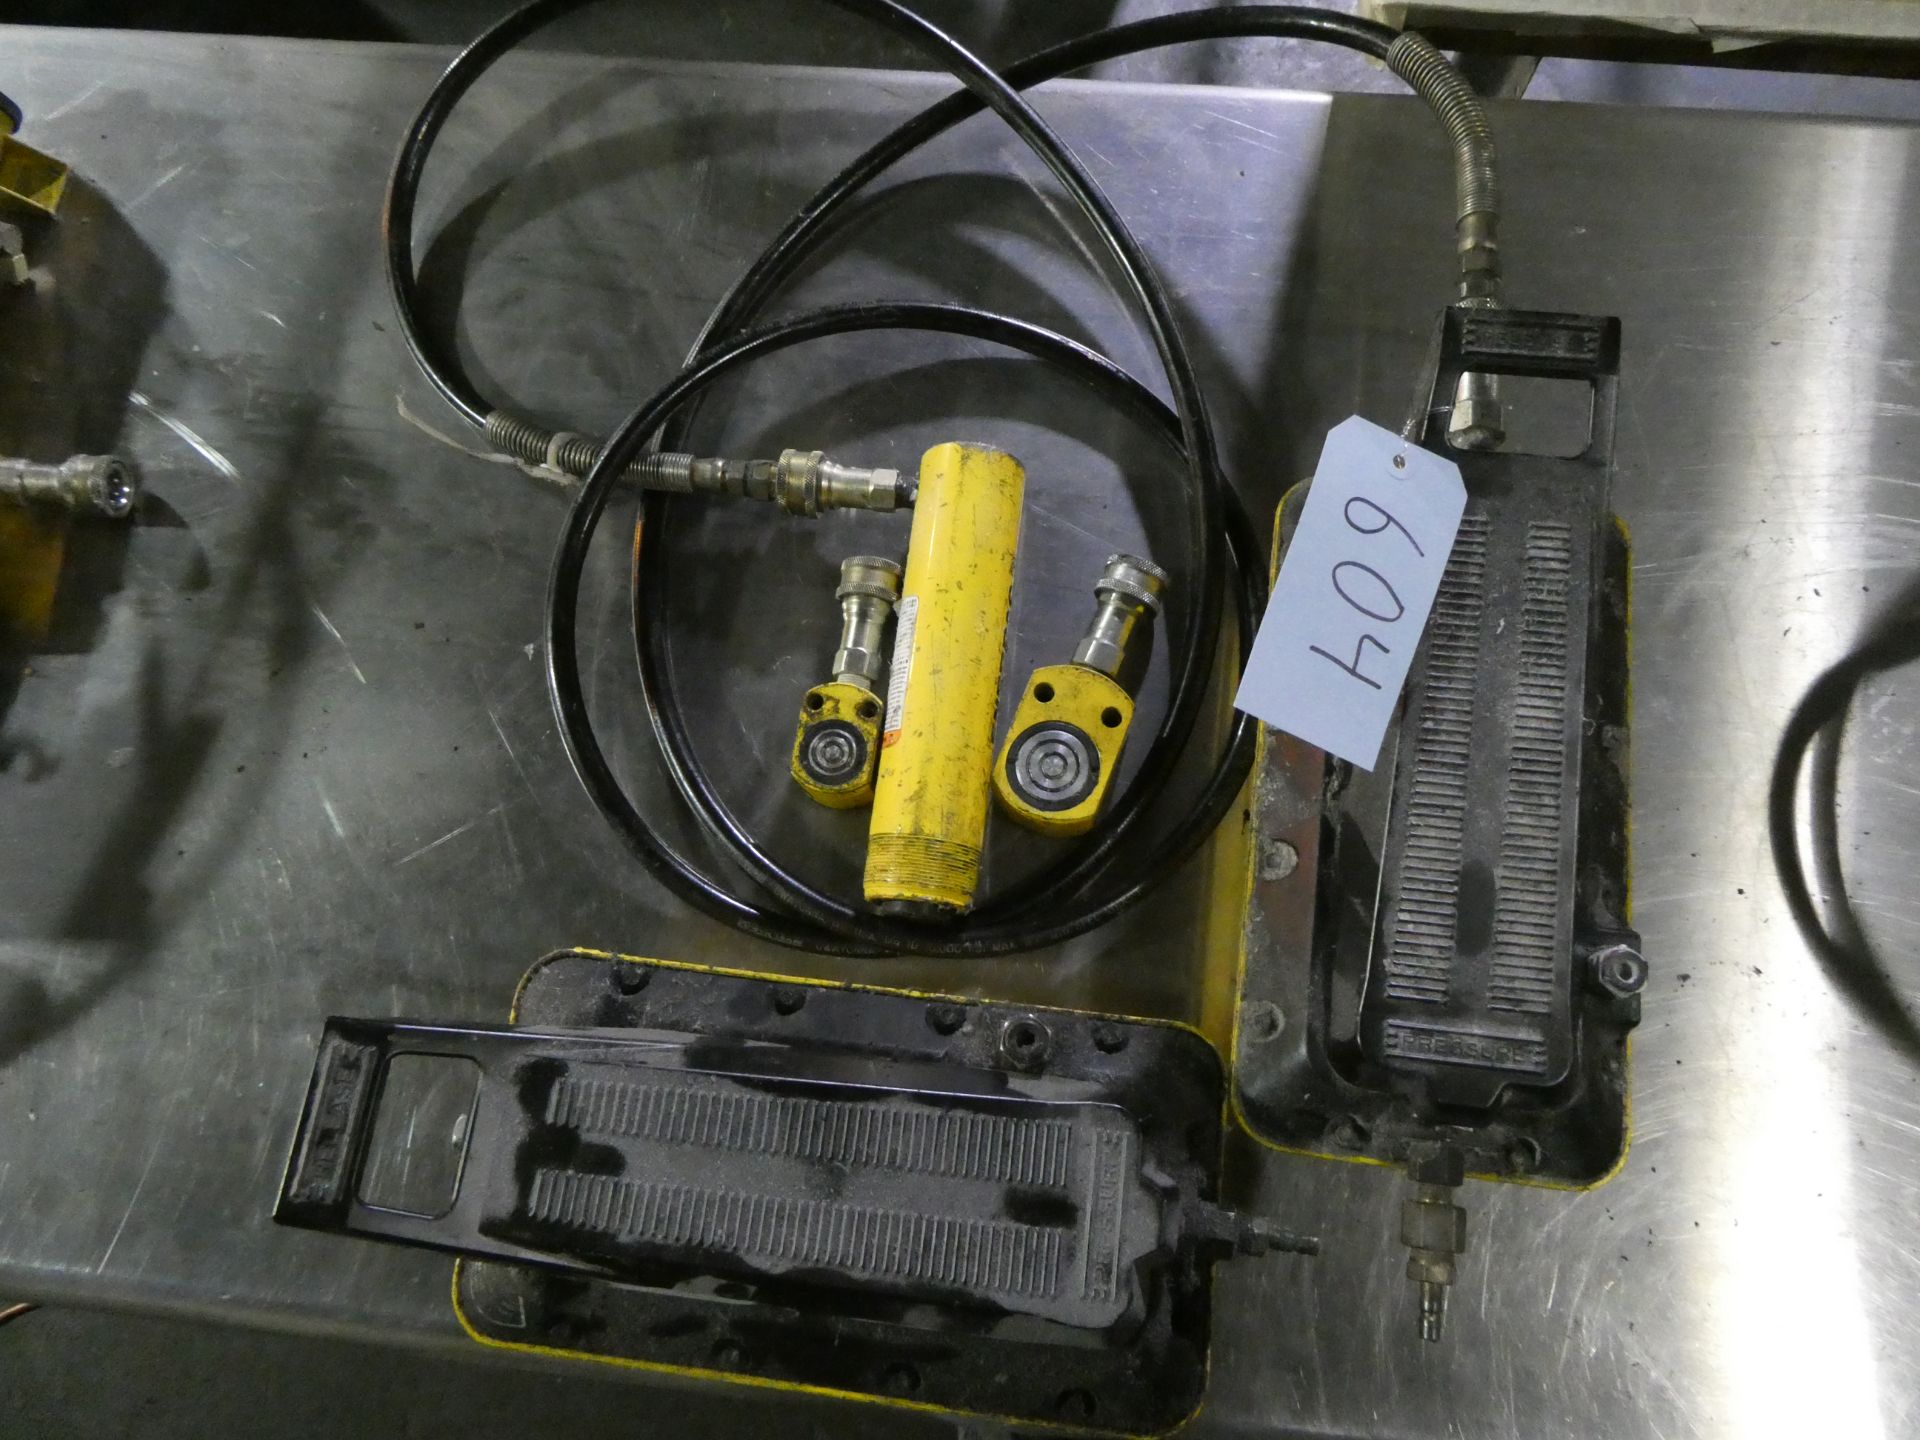 Enerpac Turbo 2 Air-Hydraulic Pumps and Jacks - Image 2 of 2